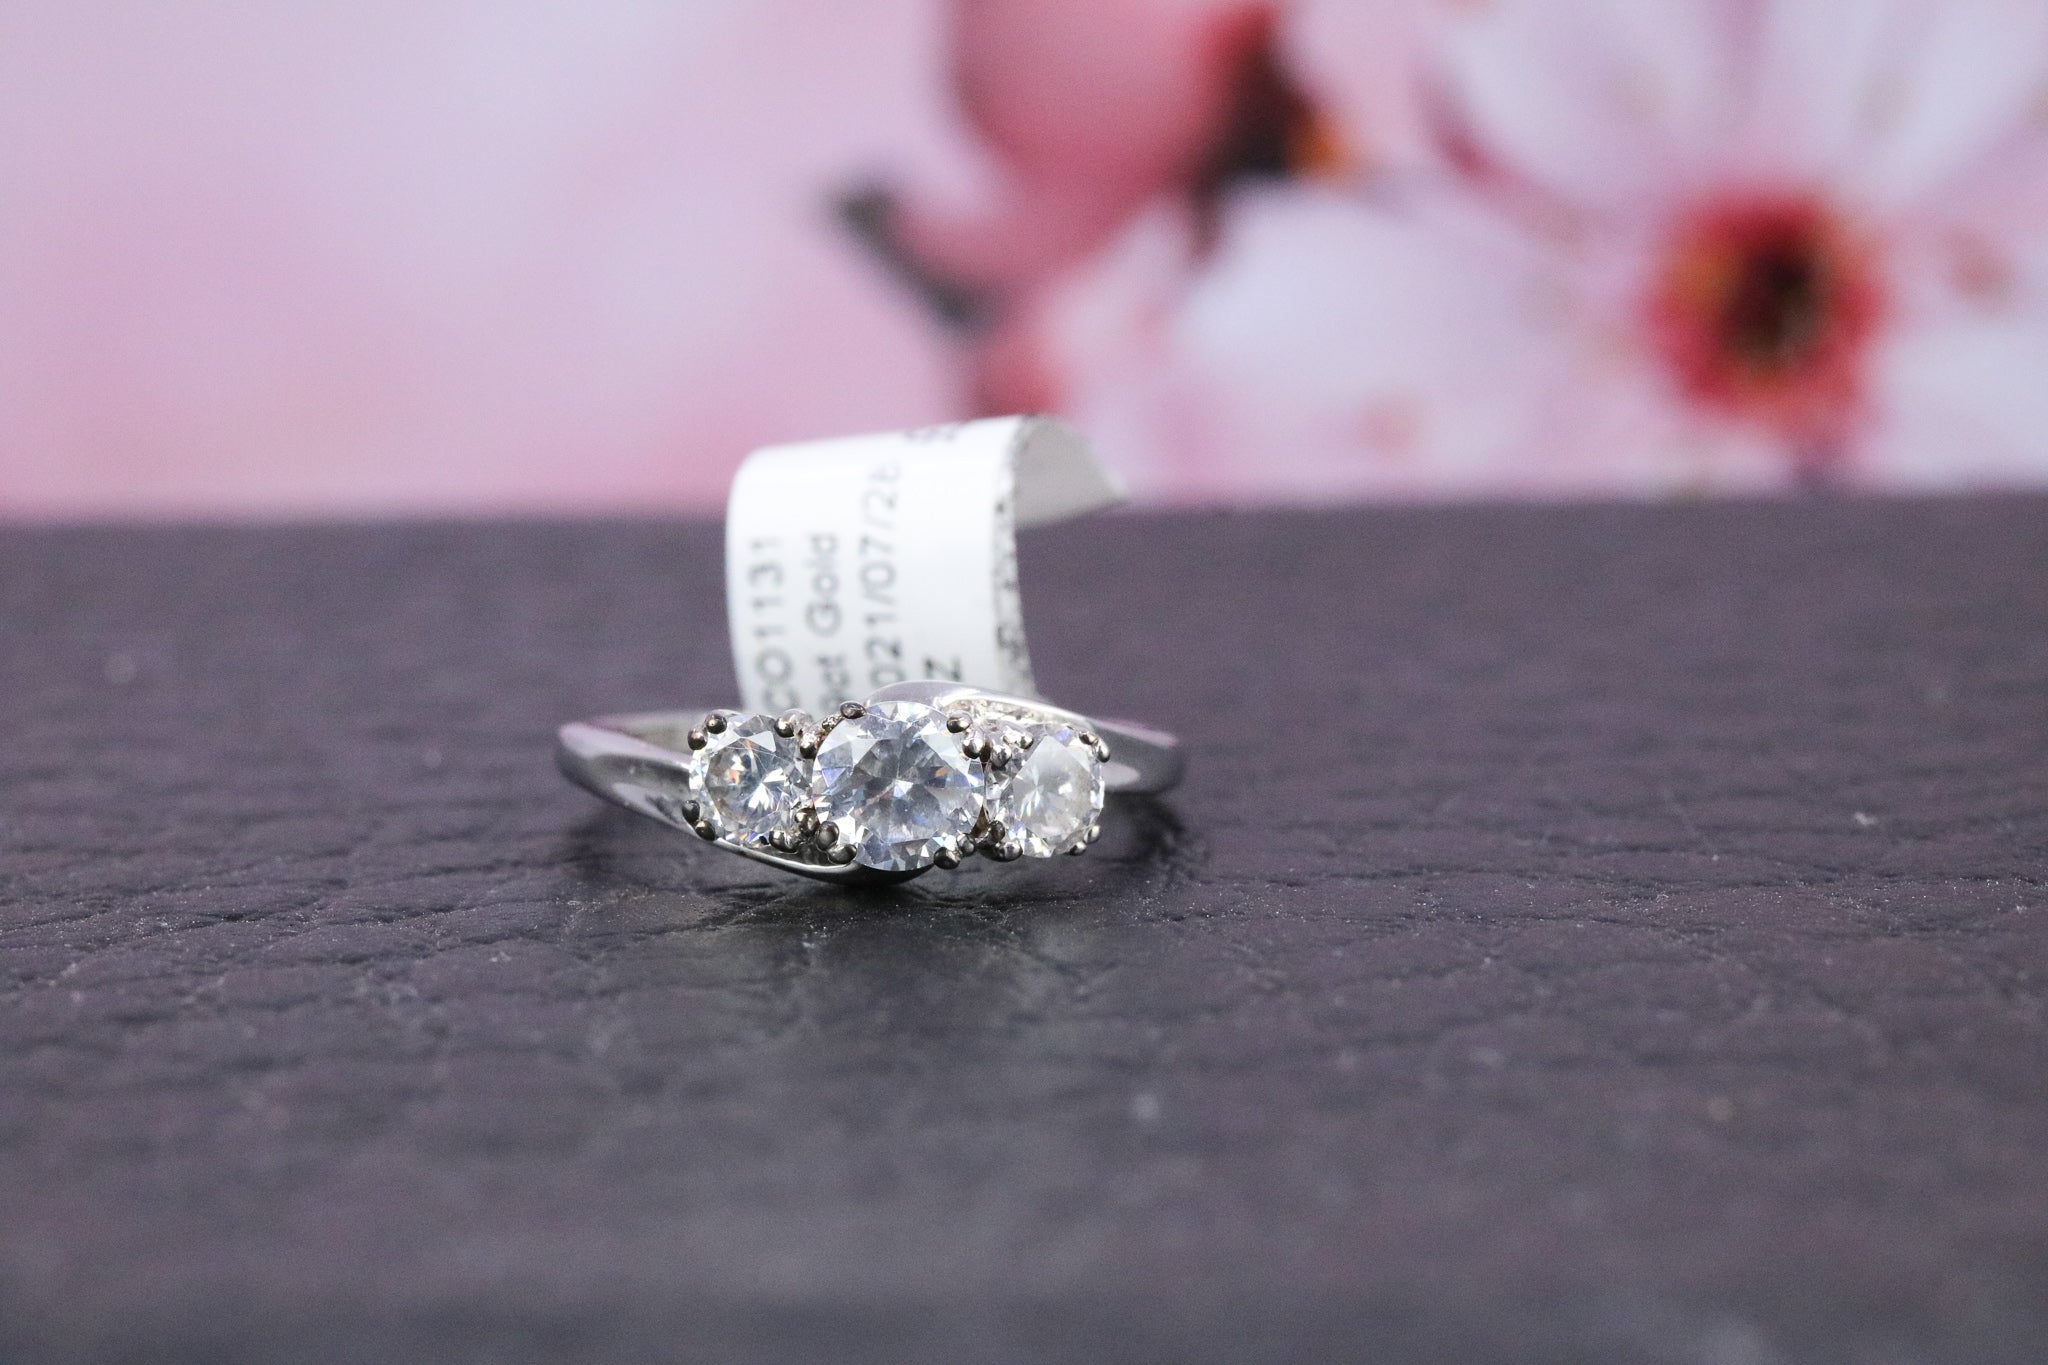 9ct White Gold Cubic Zirconia Ring - CO1131 - Hallmark Jewellers Formby & The Jewellers Bench Widnes